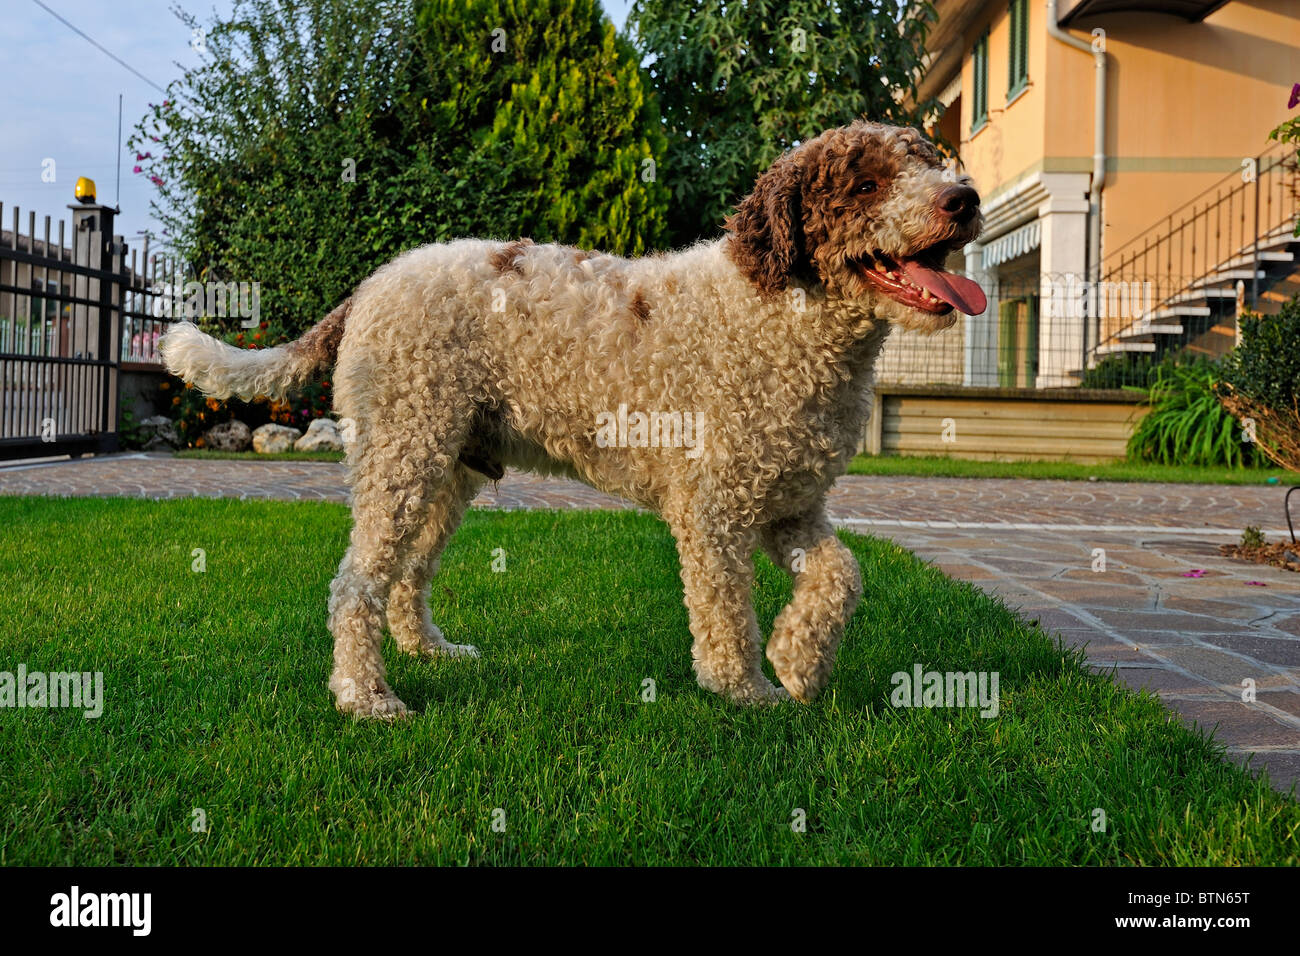 Truffle, Hound, Lagotto Romagnolo standing in front garden of house Stock Photo